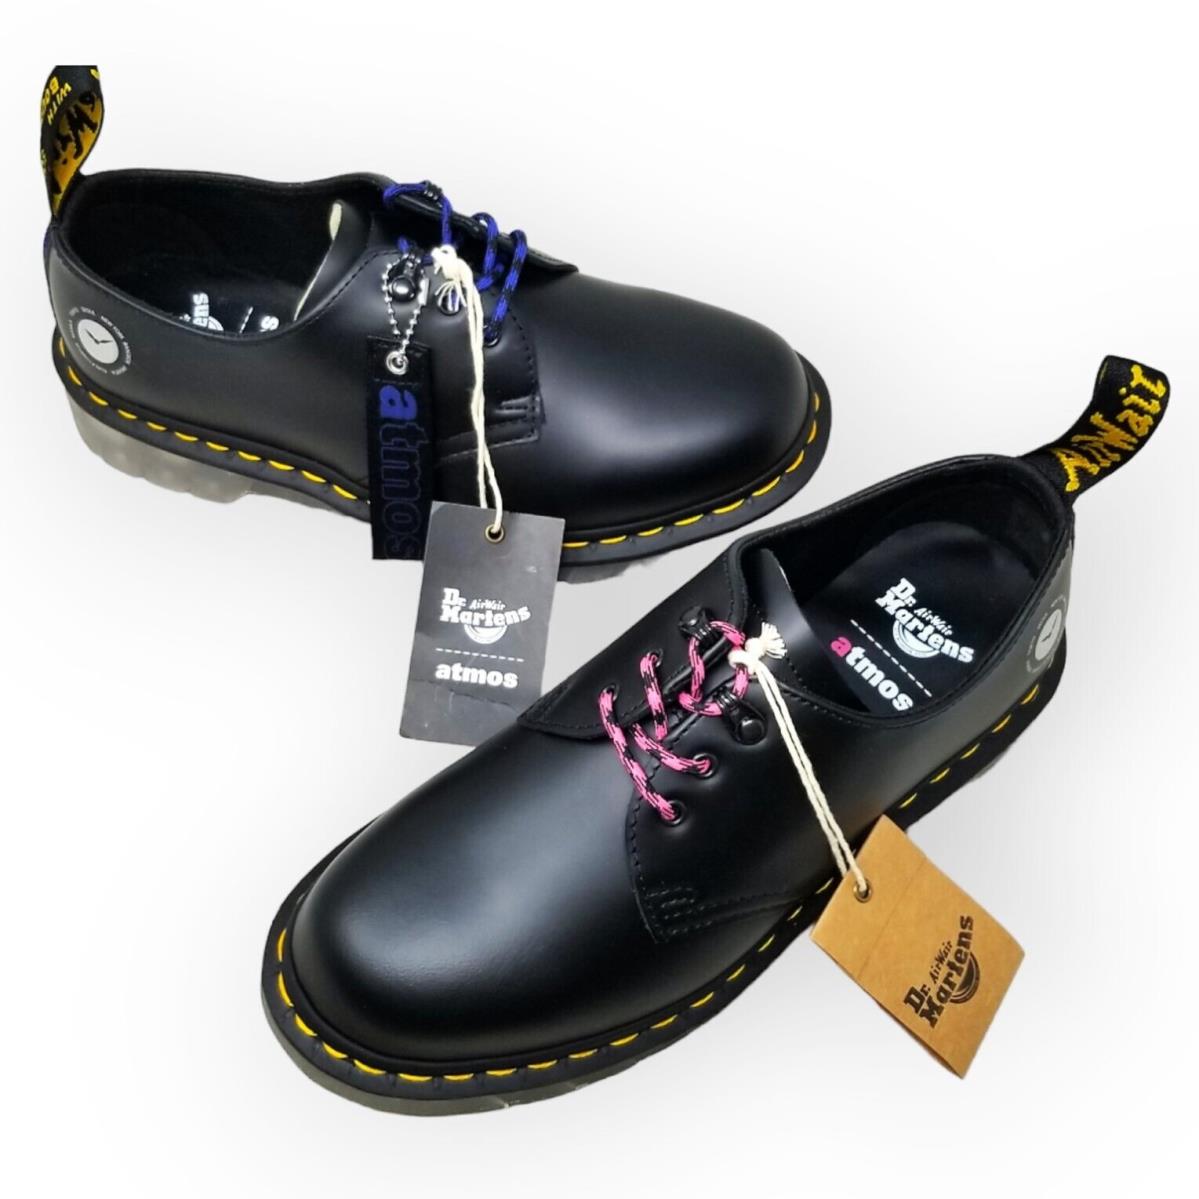 Dr. Martens 1461 x Atmos Leather Oxford Shoes - 26928001 - Smooth Black